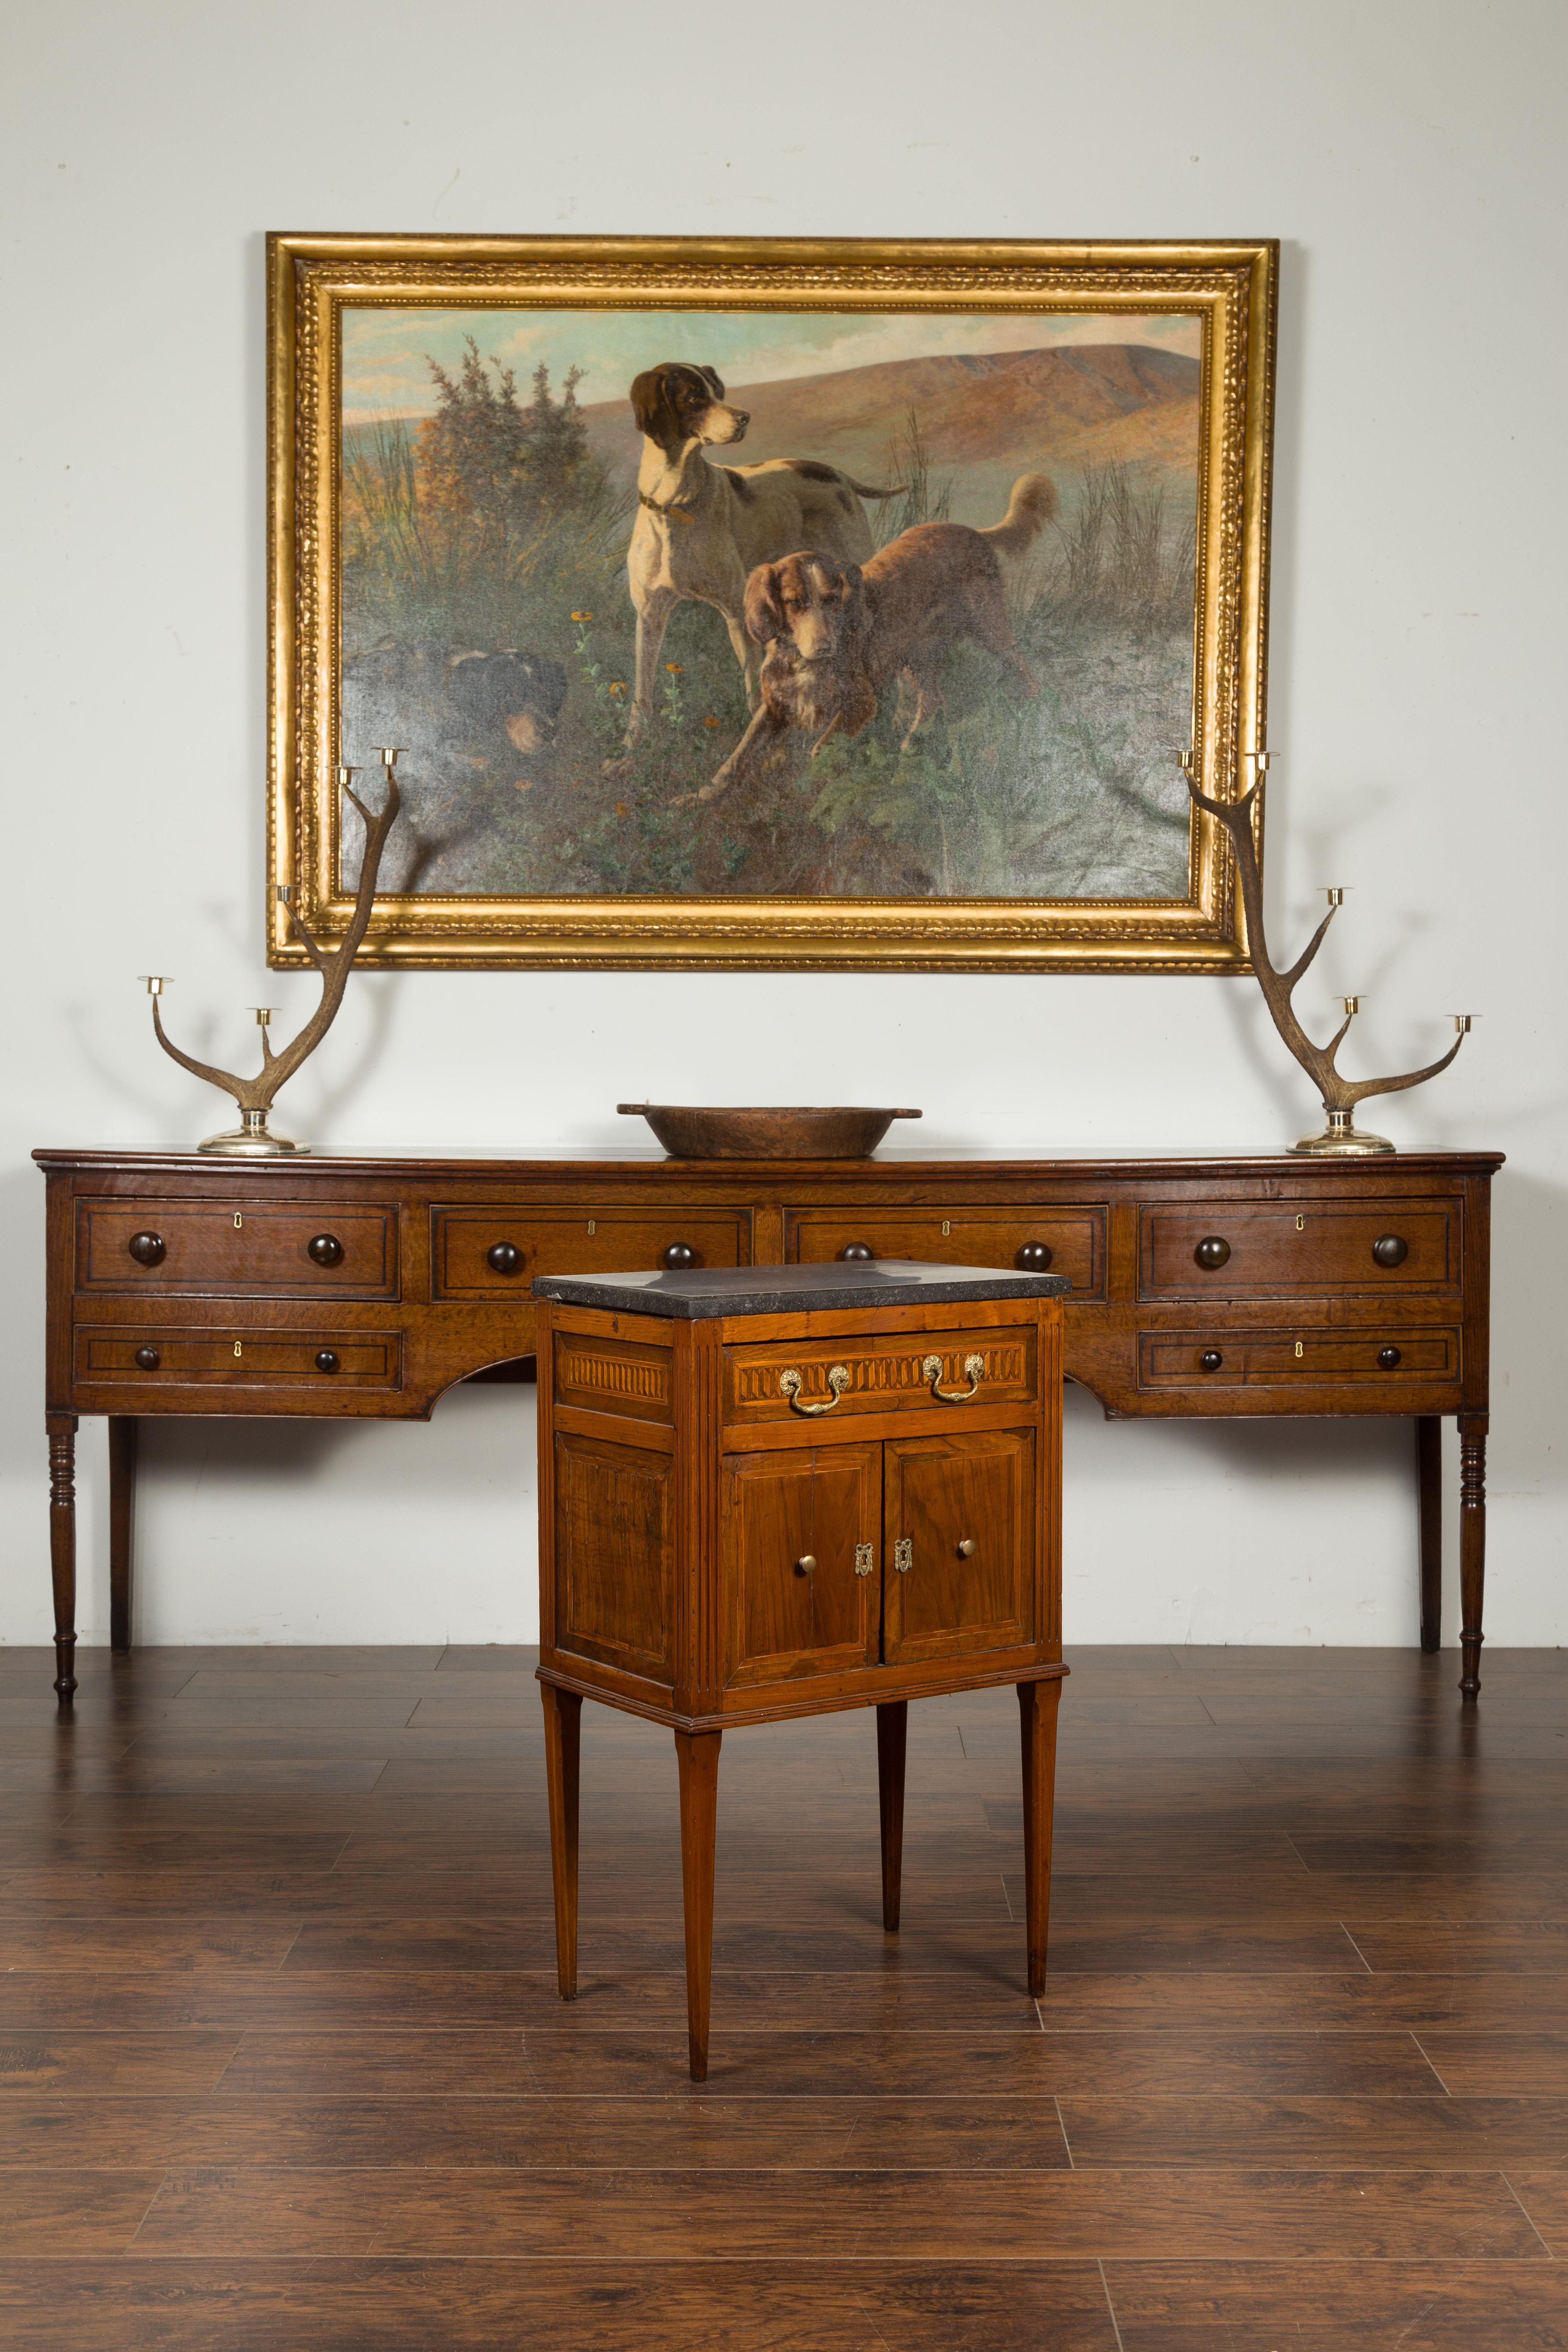 A French neoclassical period walnut side table from the early 19th century, with marquetry decor and dark grey marble top. Created in France during the early years of the 19th century, this walnut side table features a dark grey marble top sitting